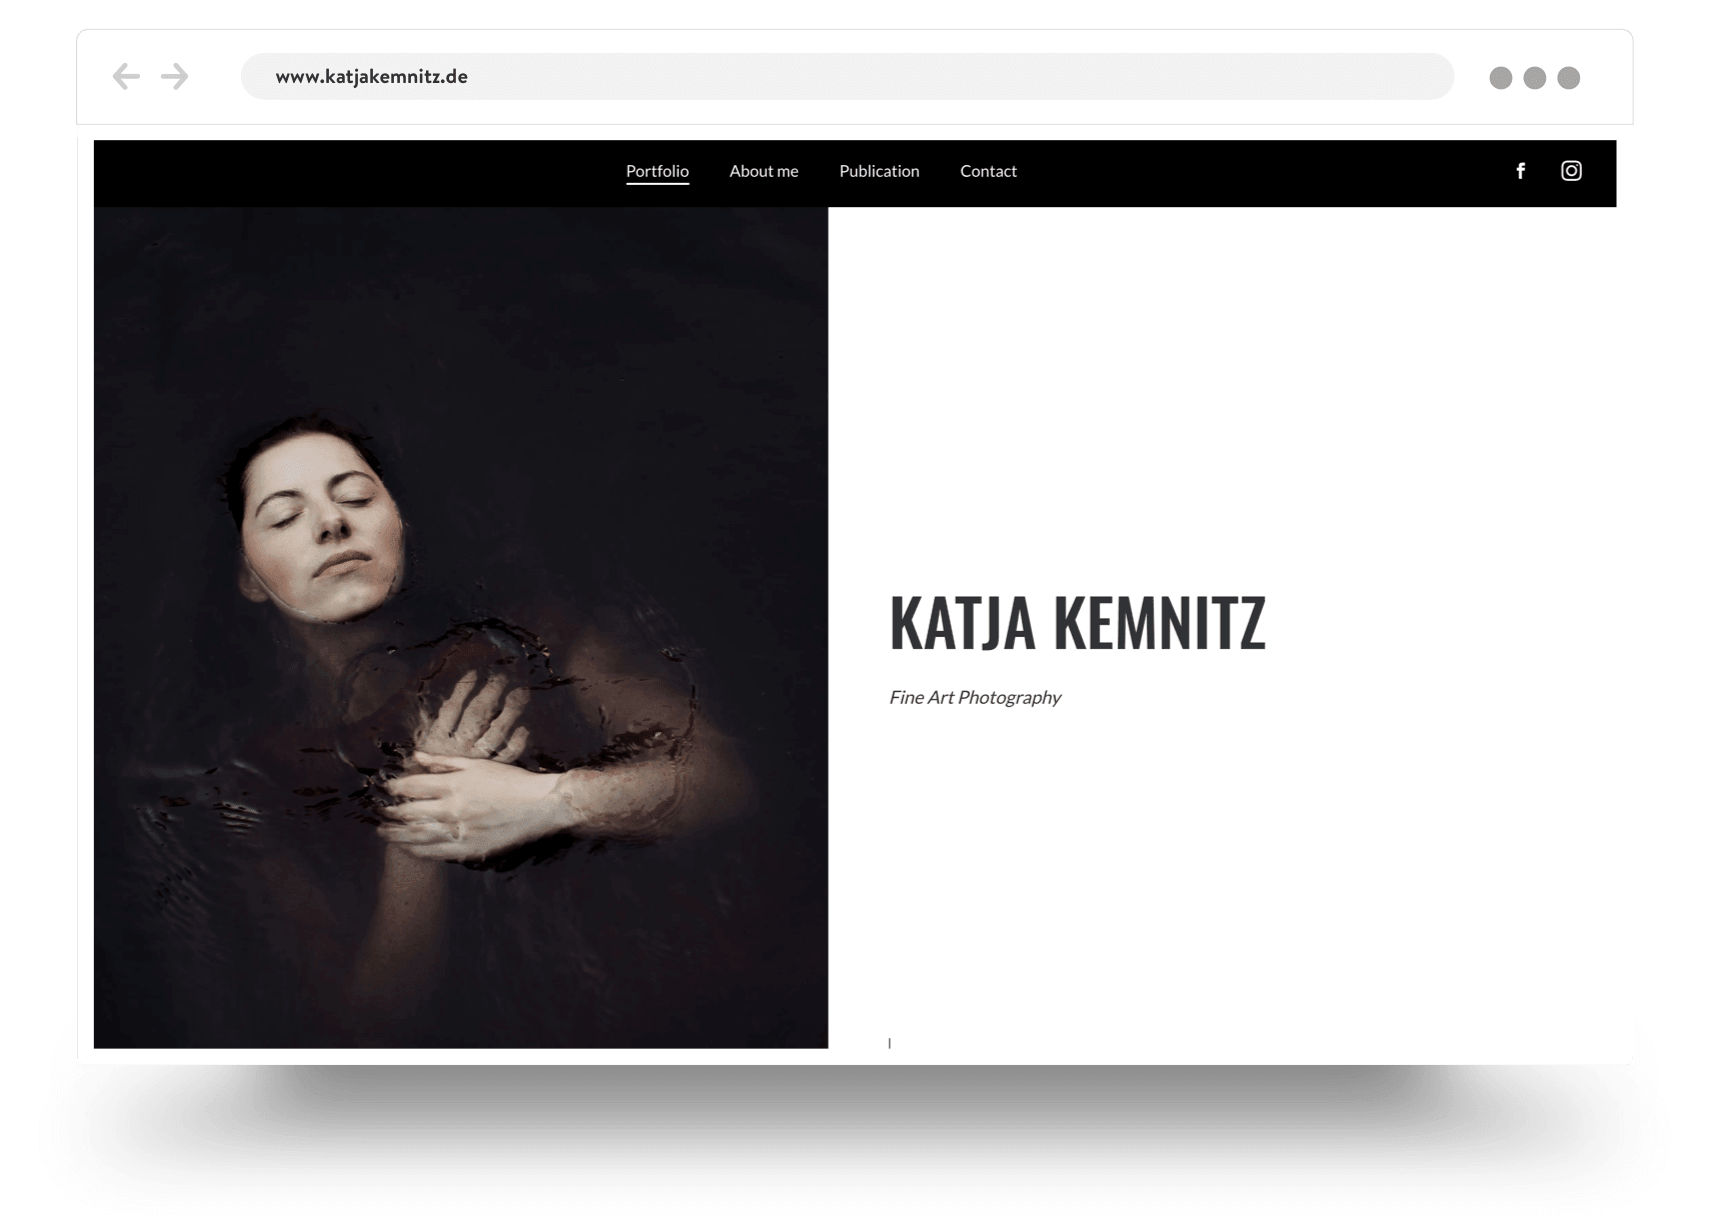 Example of a photography portfolio website build with Jimdo